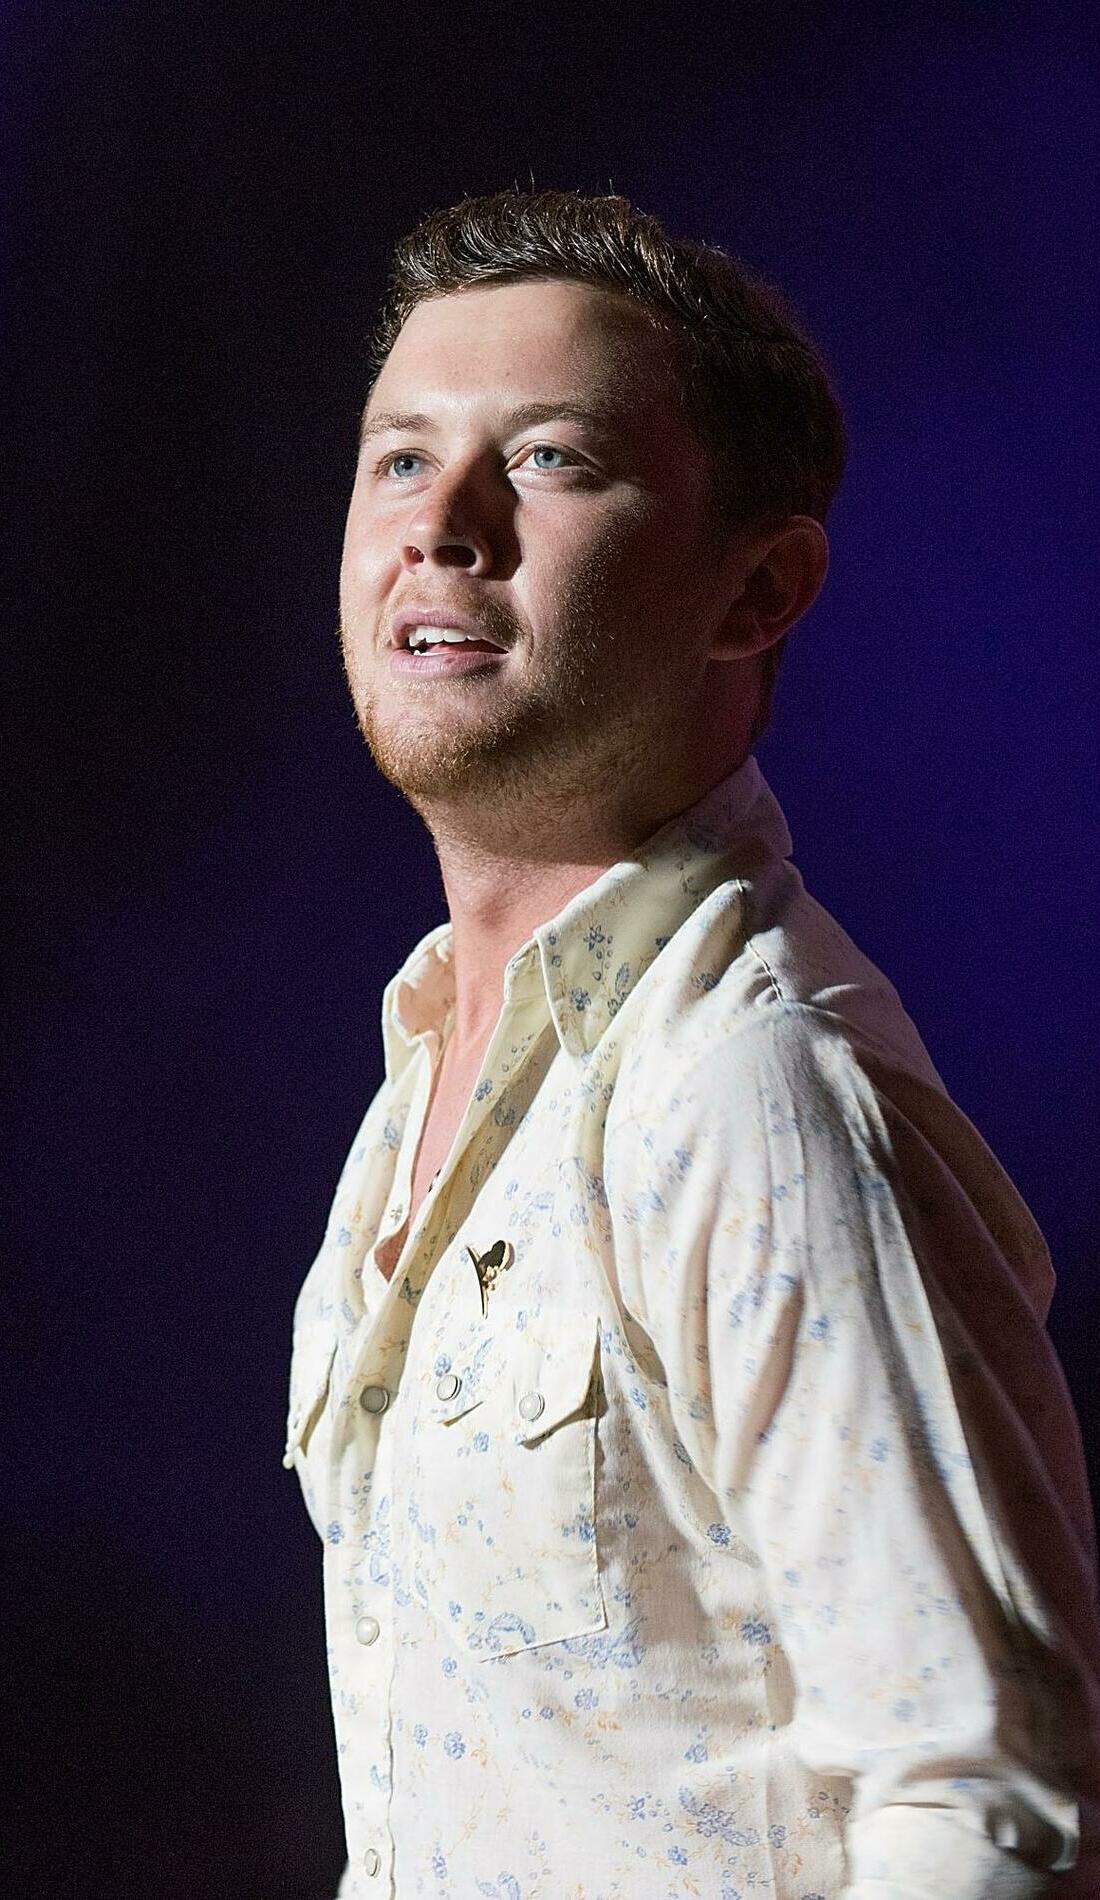 A Scotty McCreery live event